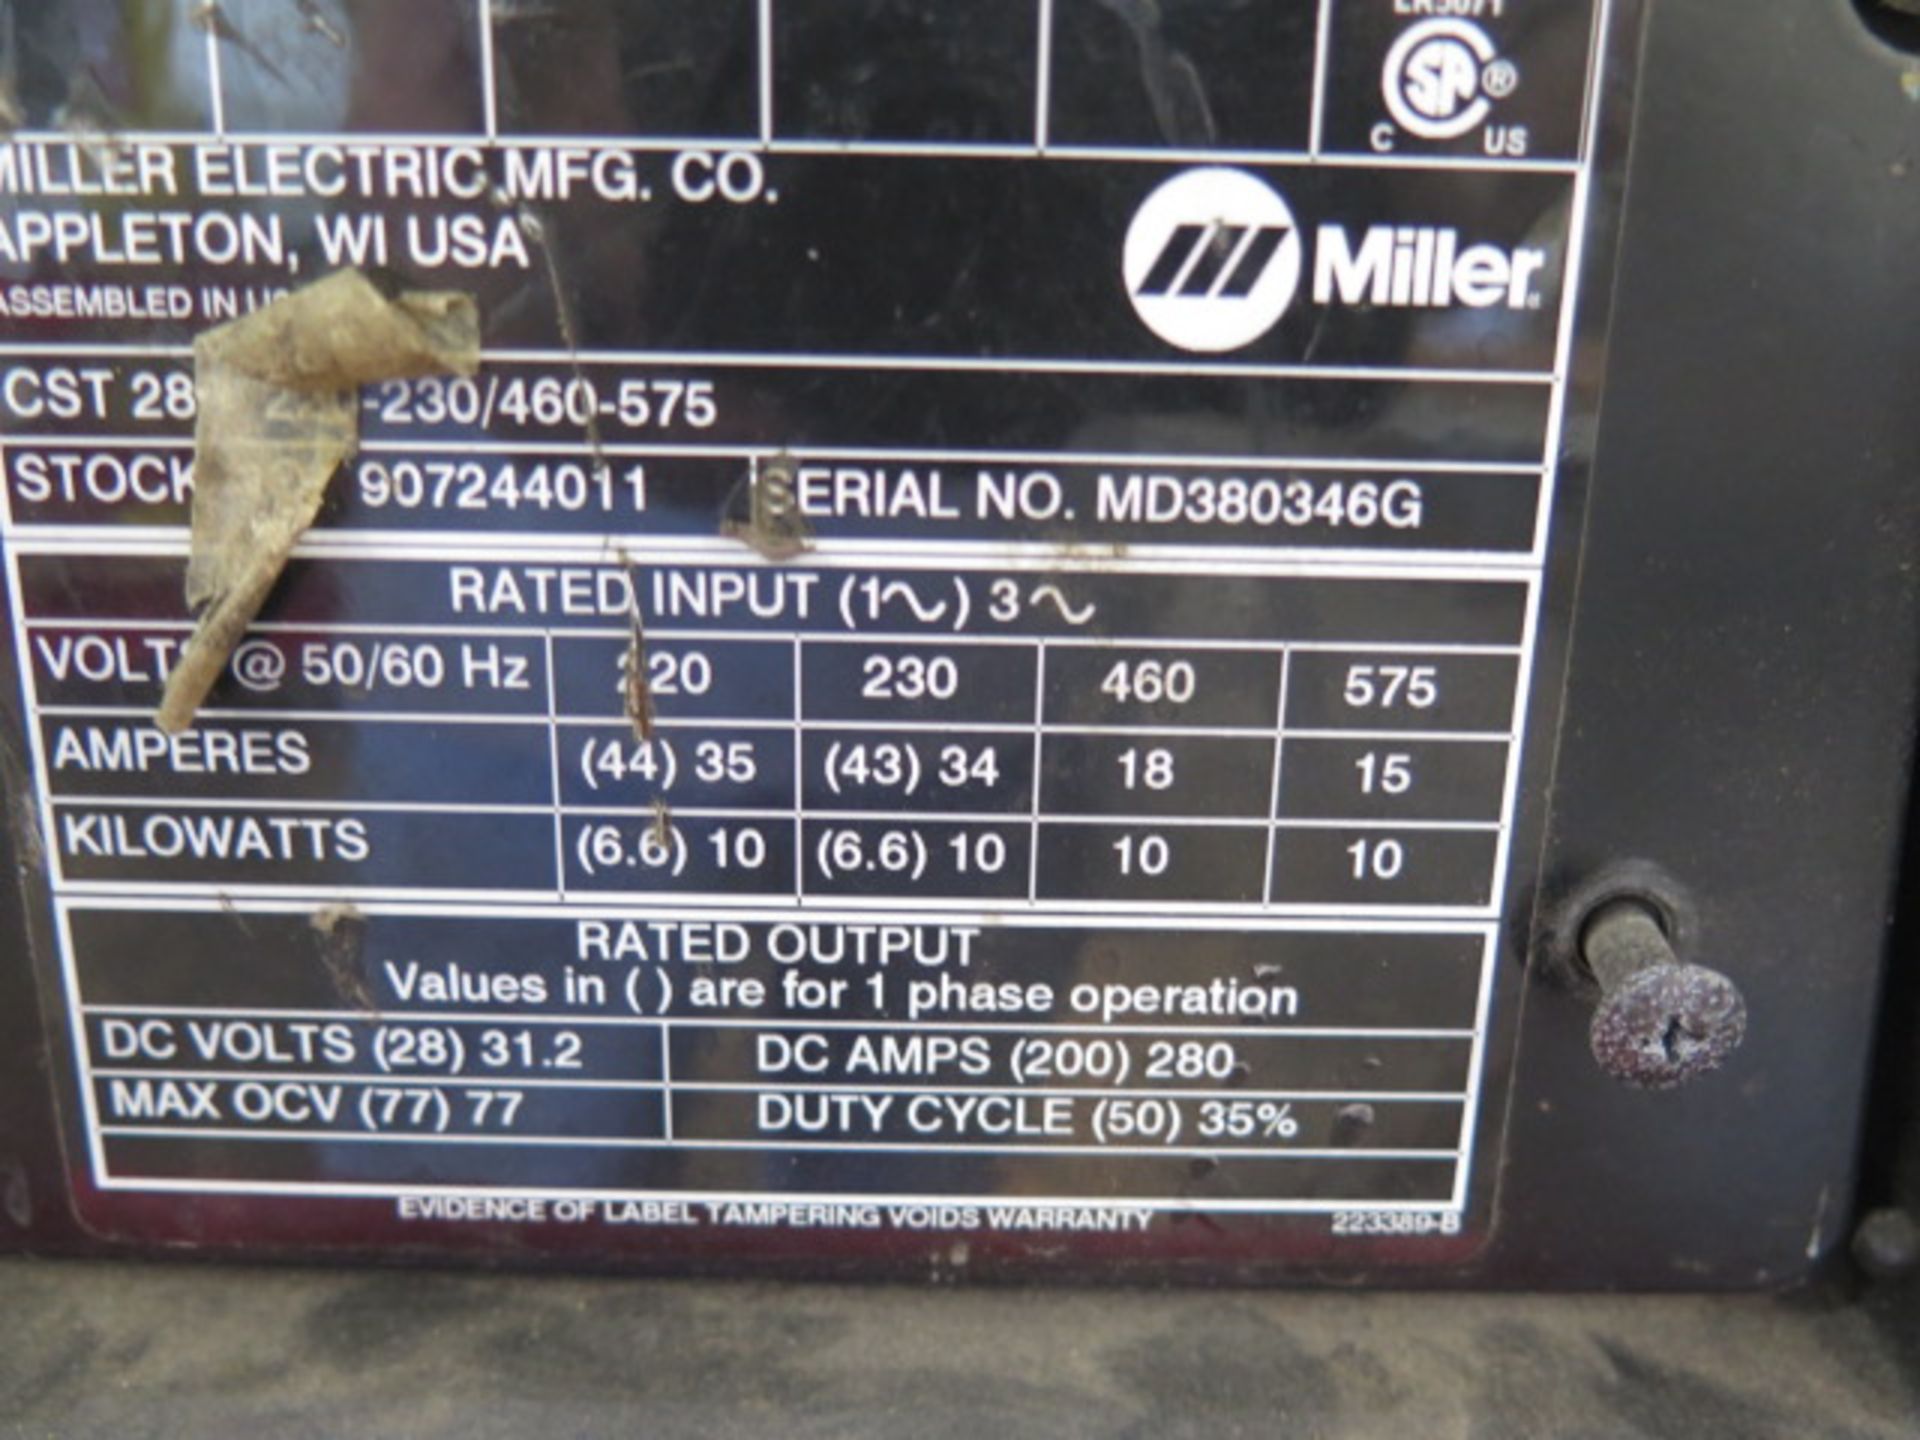 Miller CST280 Arc Welding Power Source s/n MD380346G (SOLD AS-IS - NO WARRANTY) - Image 5 of 5